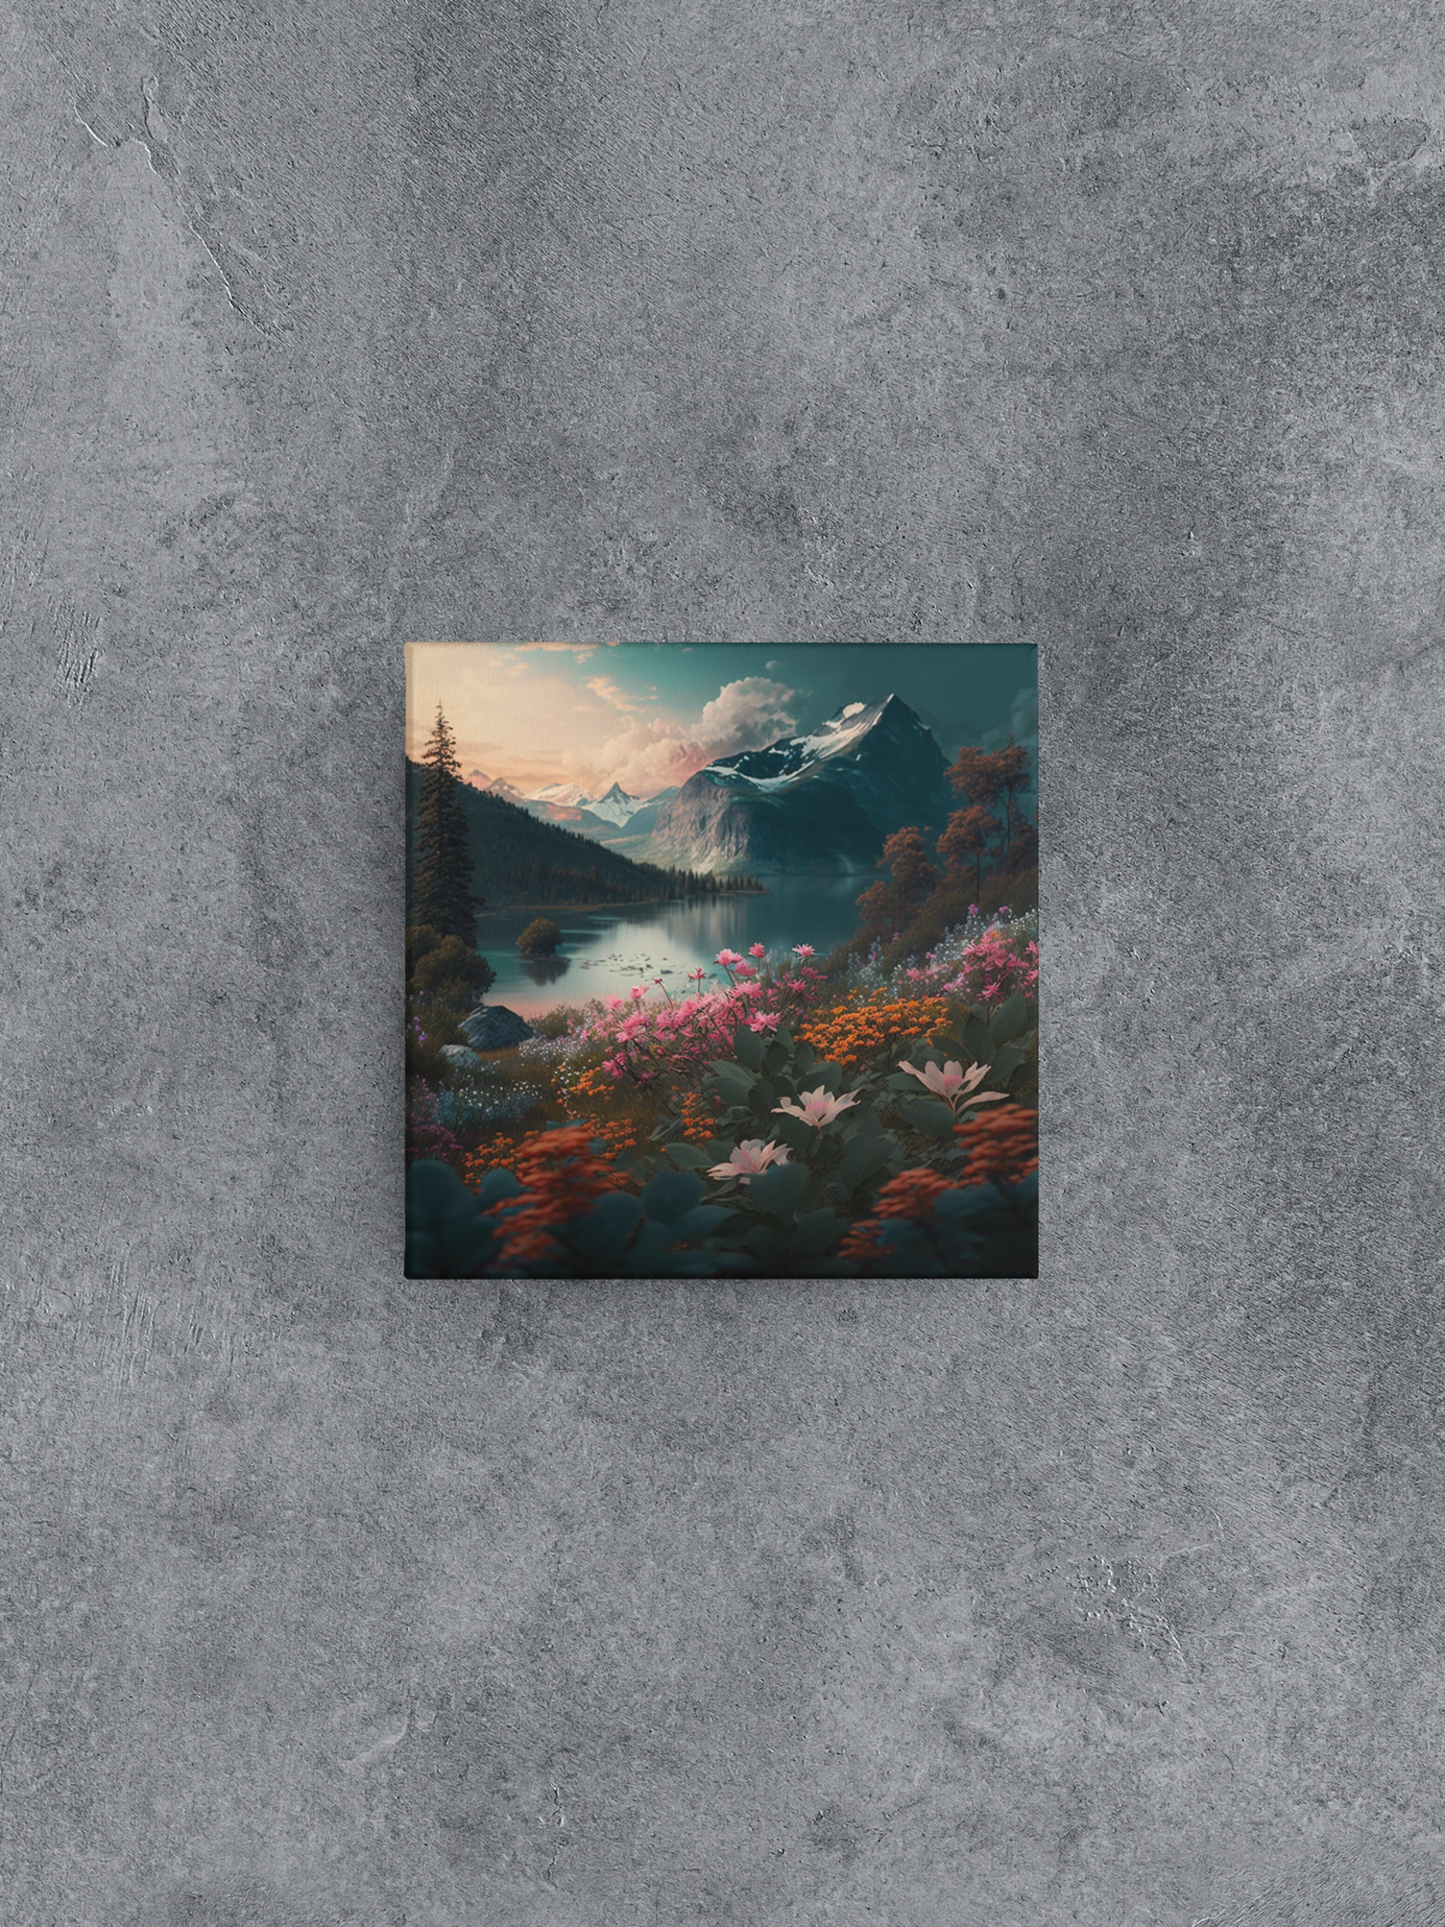 Beauty of Nature Canvas Wall Art, Calm Nature Landscape Stretched Canvas Print, Serene Mountain Lake with Flowers Canvas Art